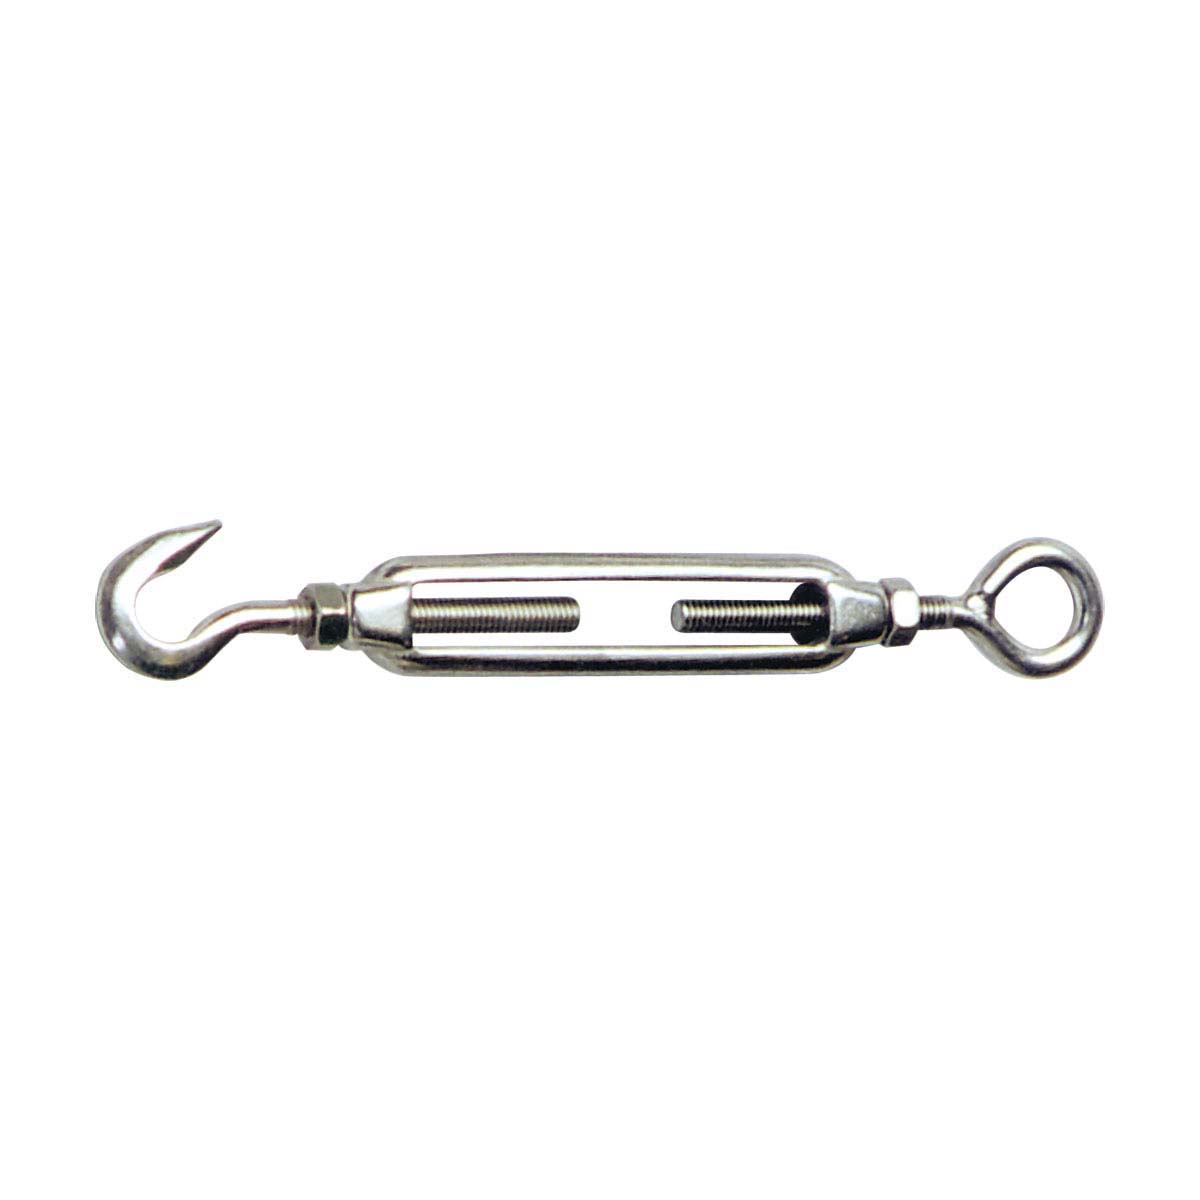 BLA 316 Stainless Steel Hook and Eye Open Body Turnbuckle M12